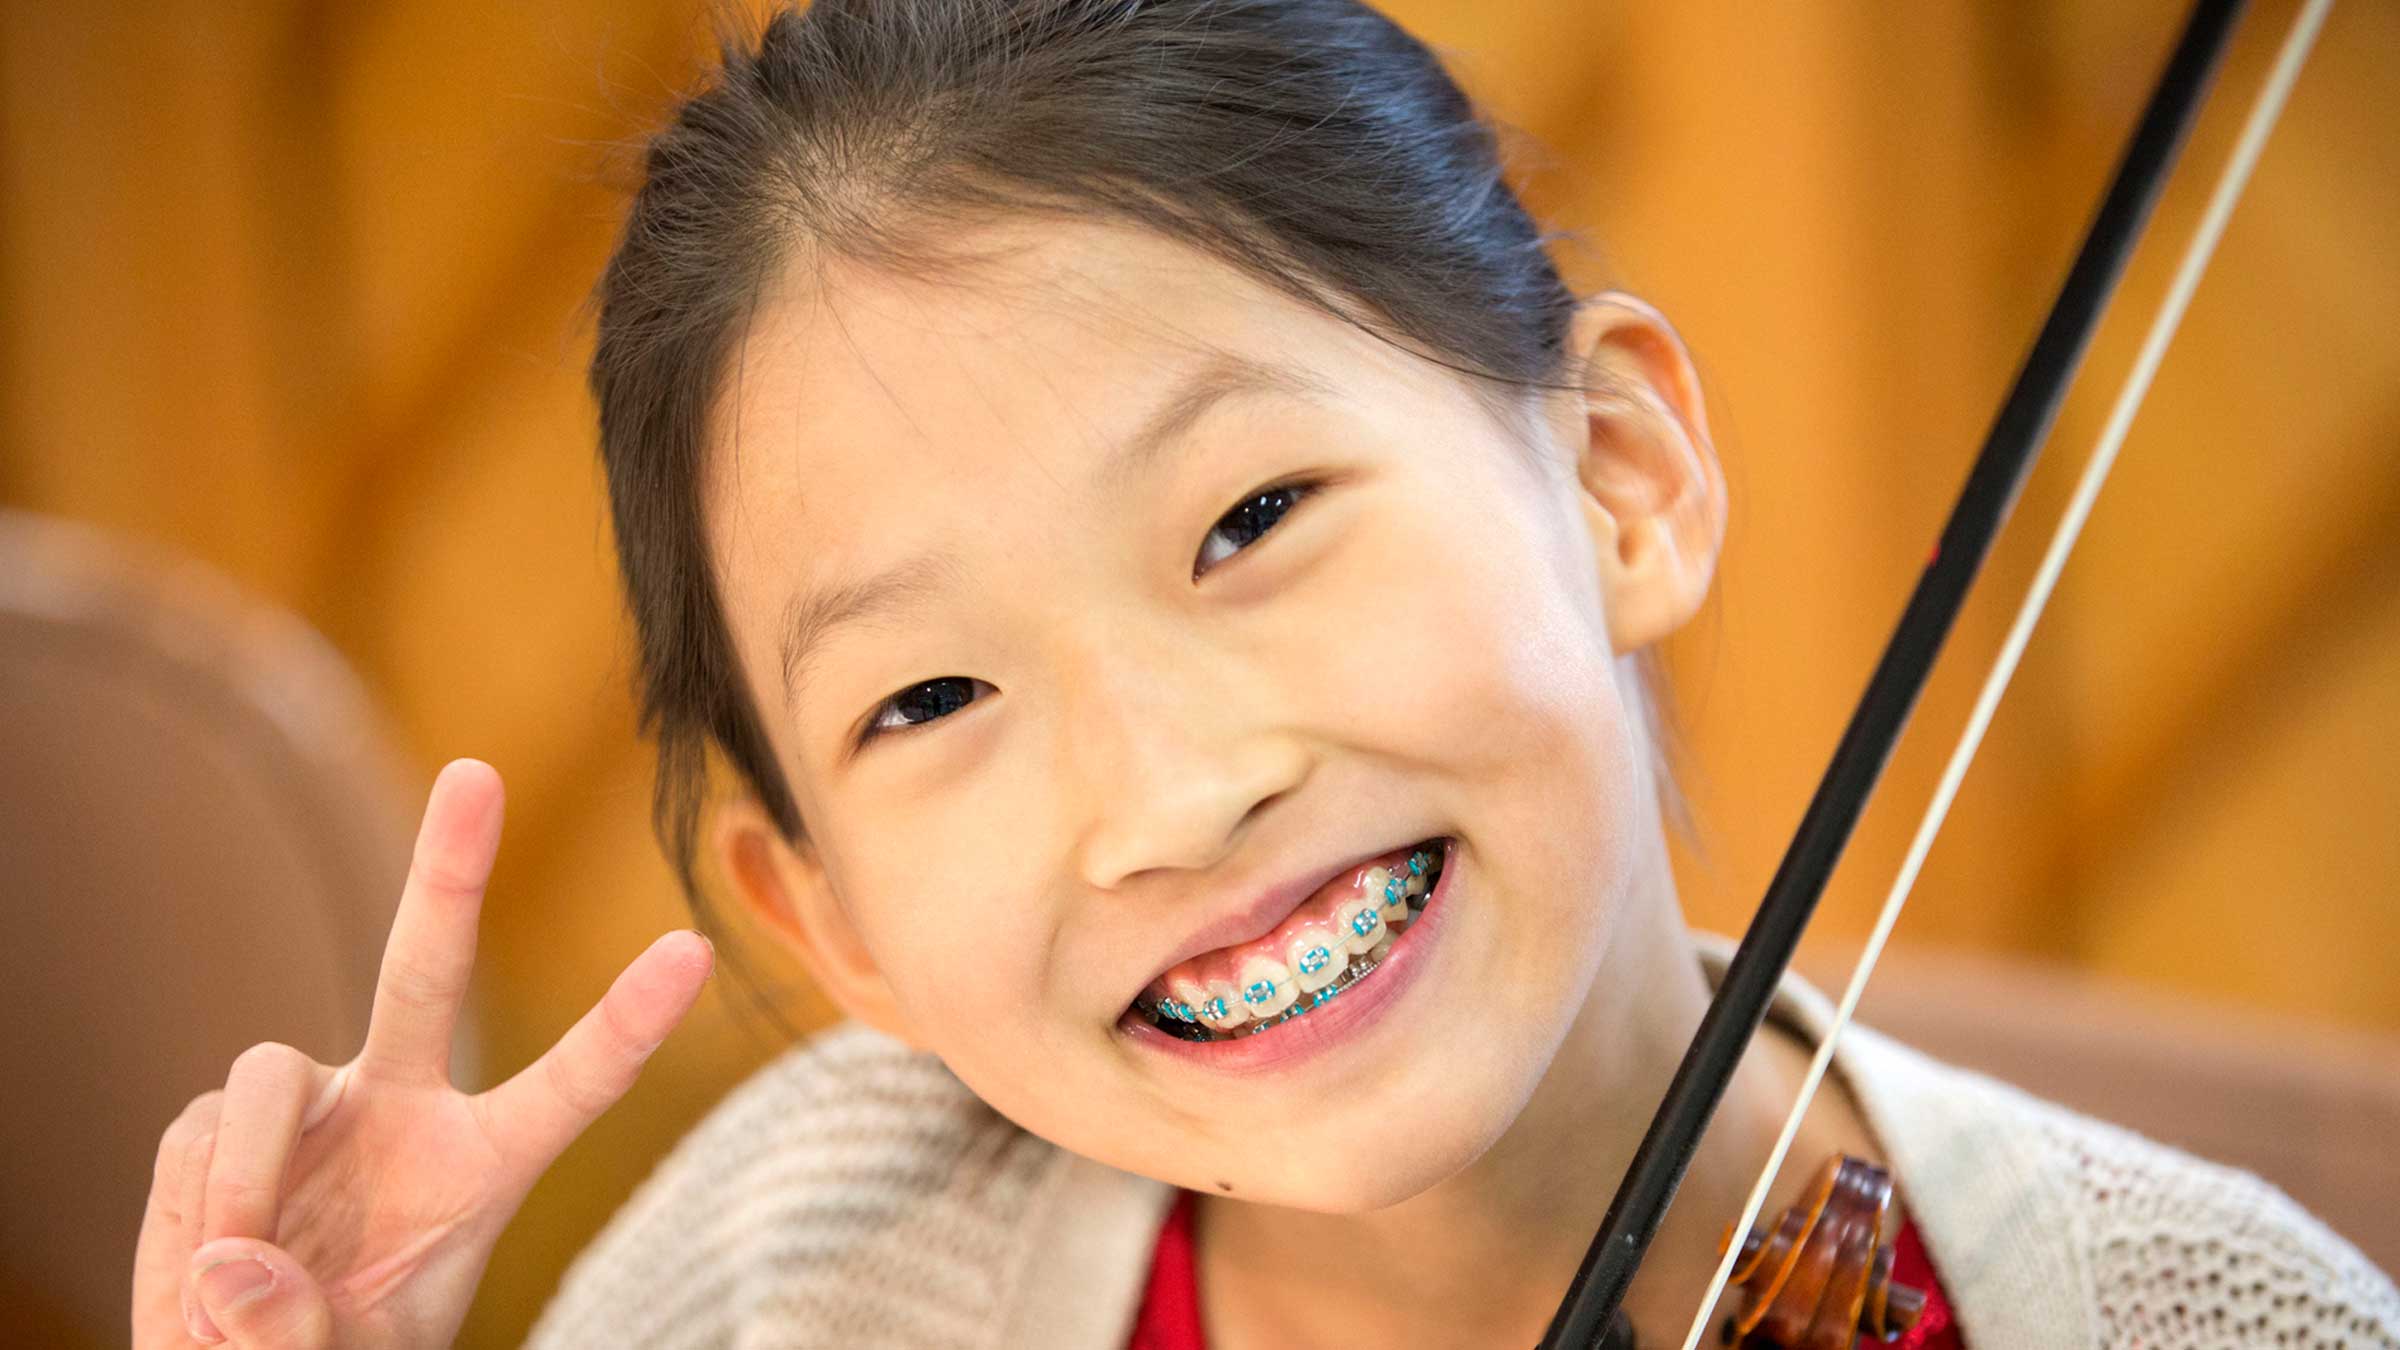 Asian girl smiling with braces and holding a violin